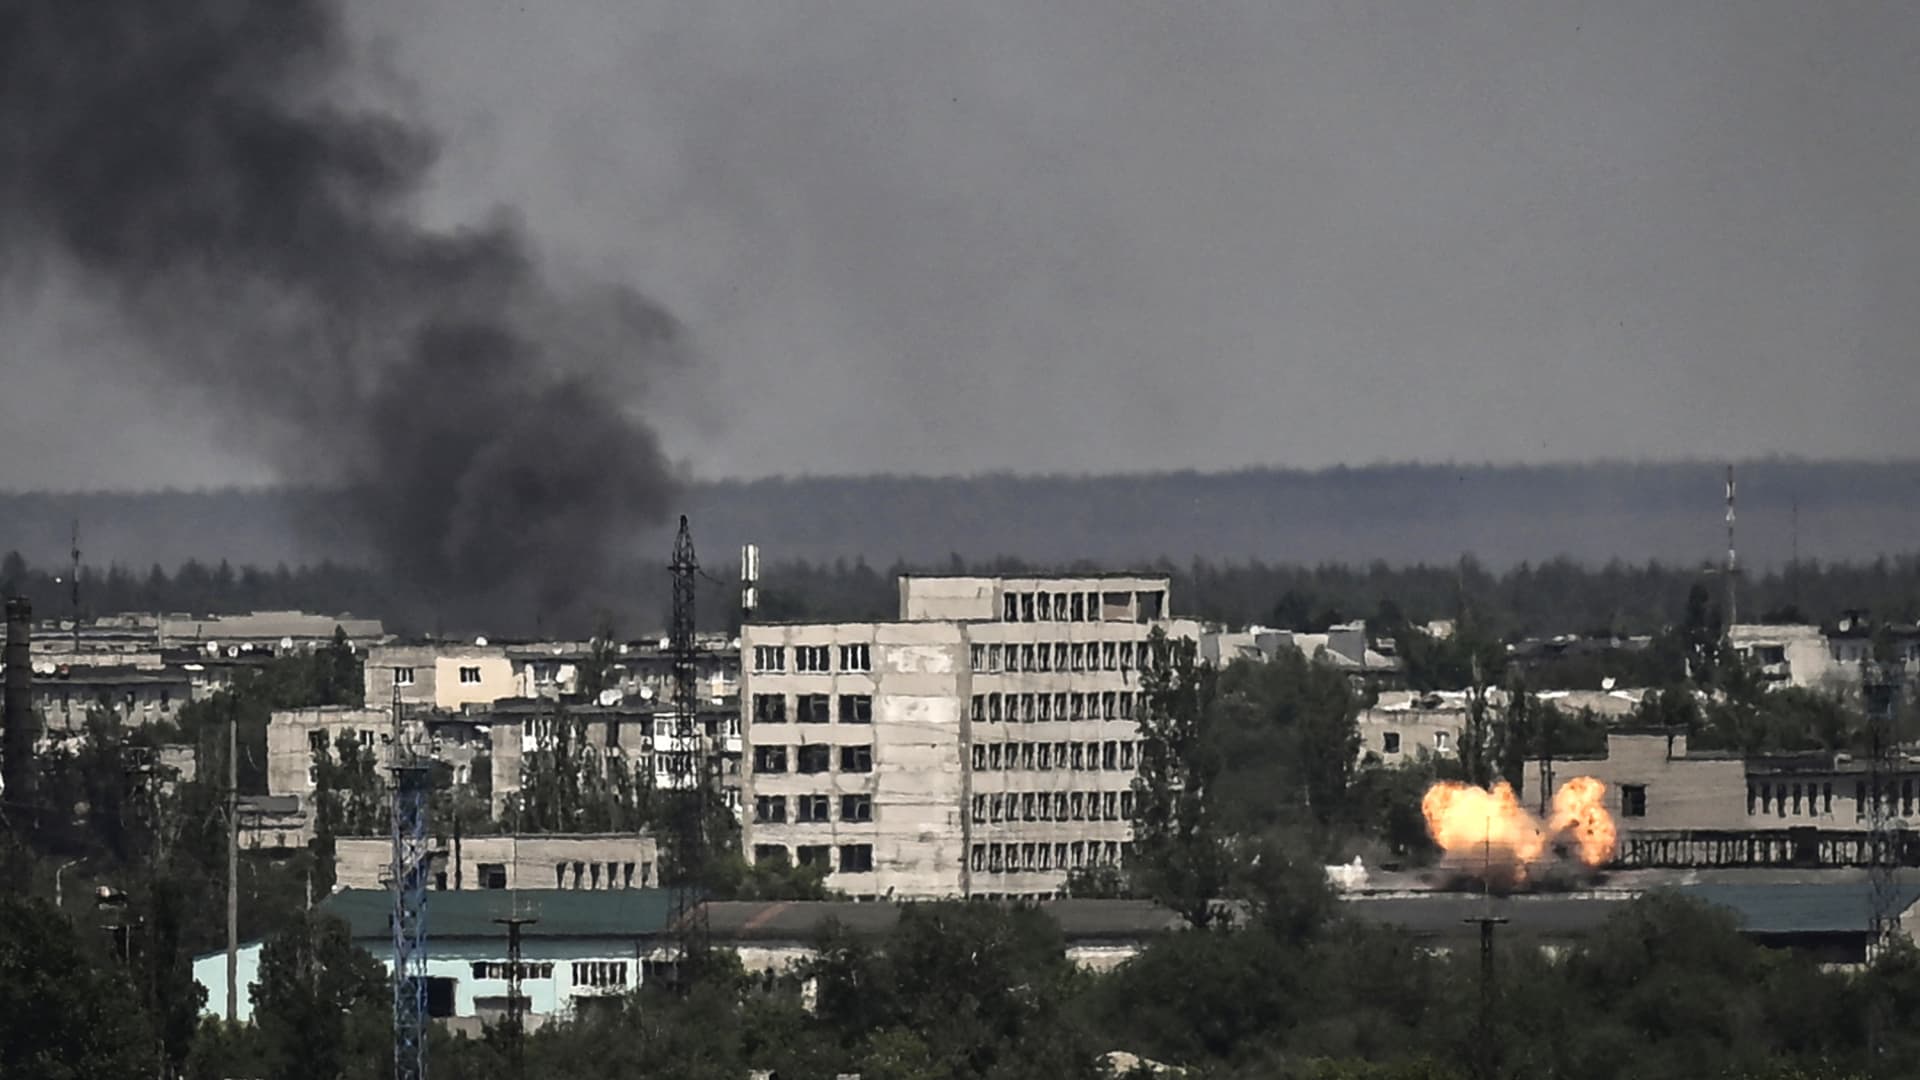 A photograph shows an explosion in the city of Severodonetsk during heavy fightings between Ukrainian and Russian troops at eastern Ukrainian region of Donbas on May 30, 2022, on the 96th day of the Russian invasion of Ukraine.